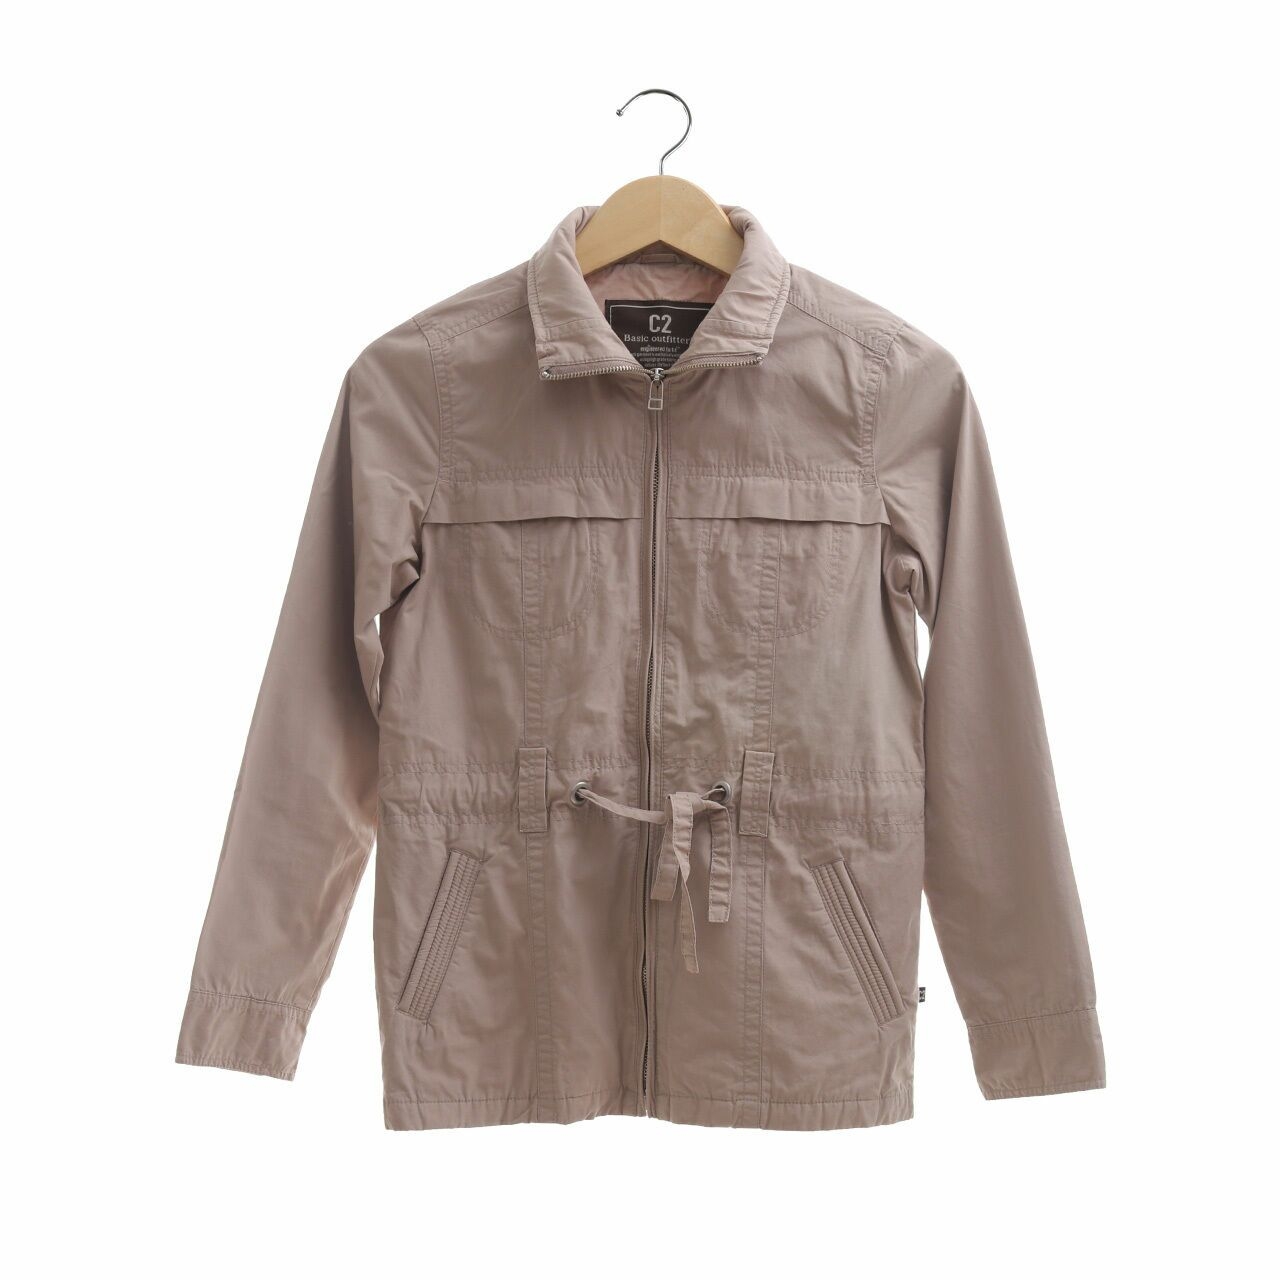 C2 Outfitters Beige Jacket